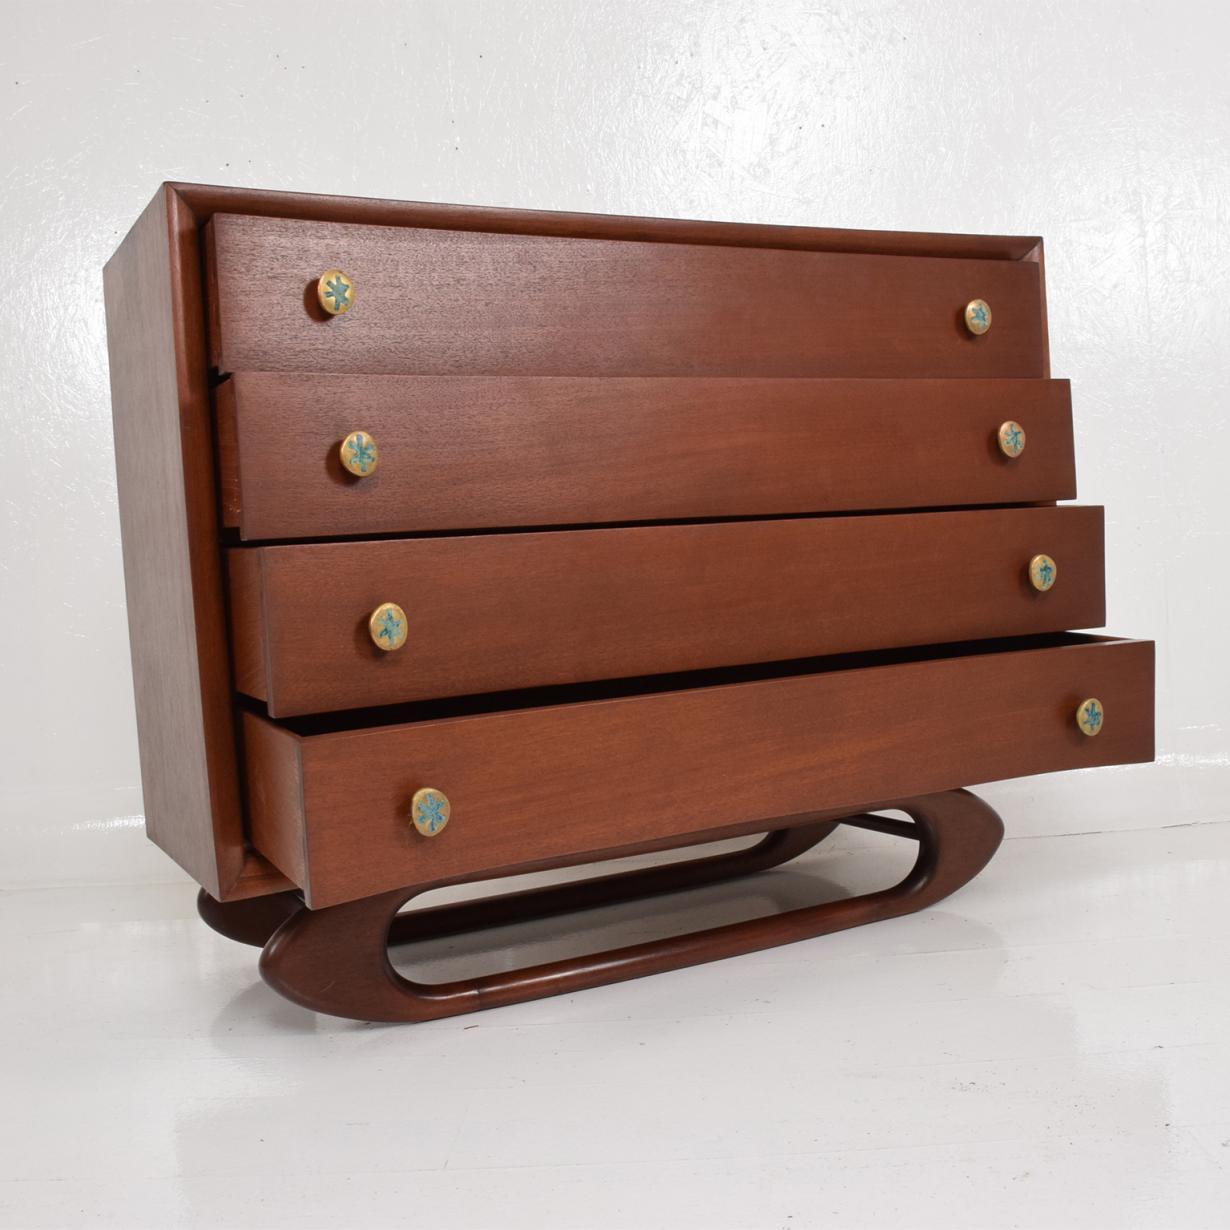 Mid-20th Century Midcentury Mexican Modernist Chest of Drawers Dresser Frank Kyle Pepe Mendoza